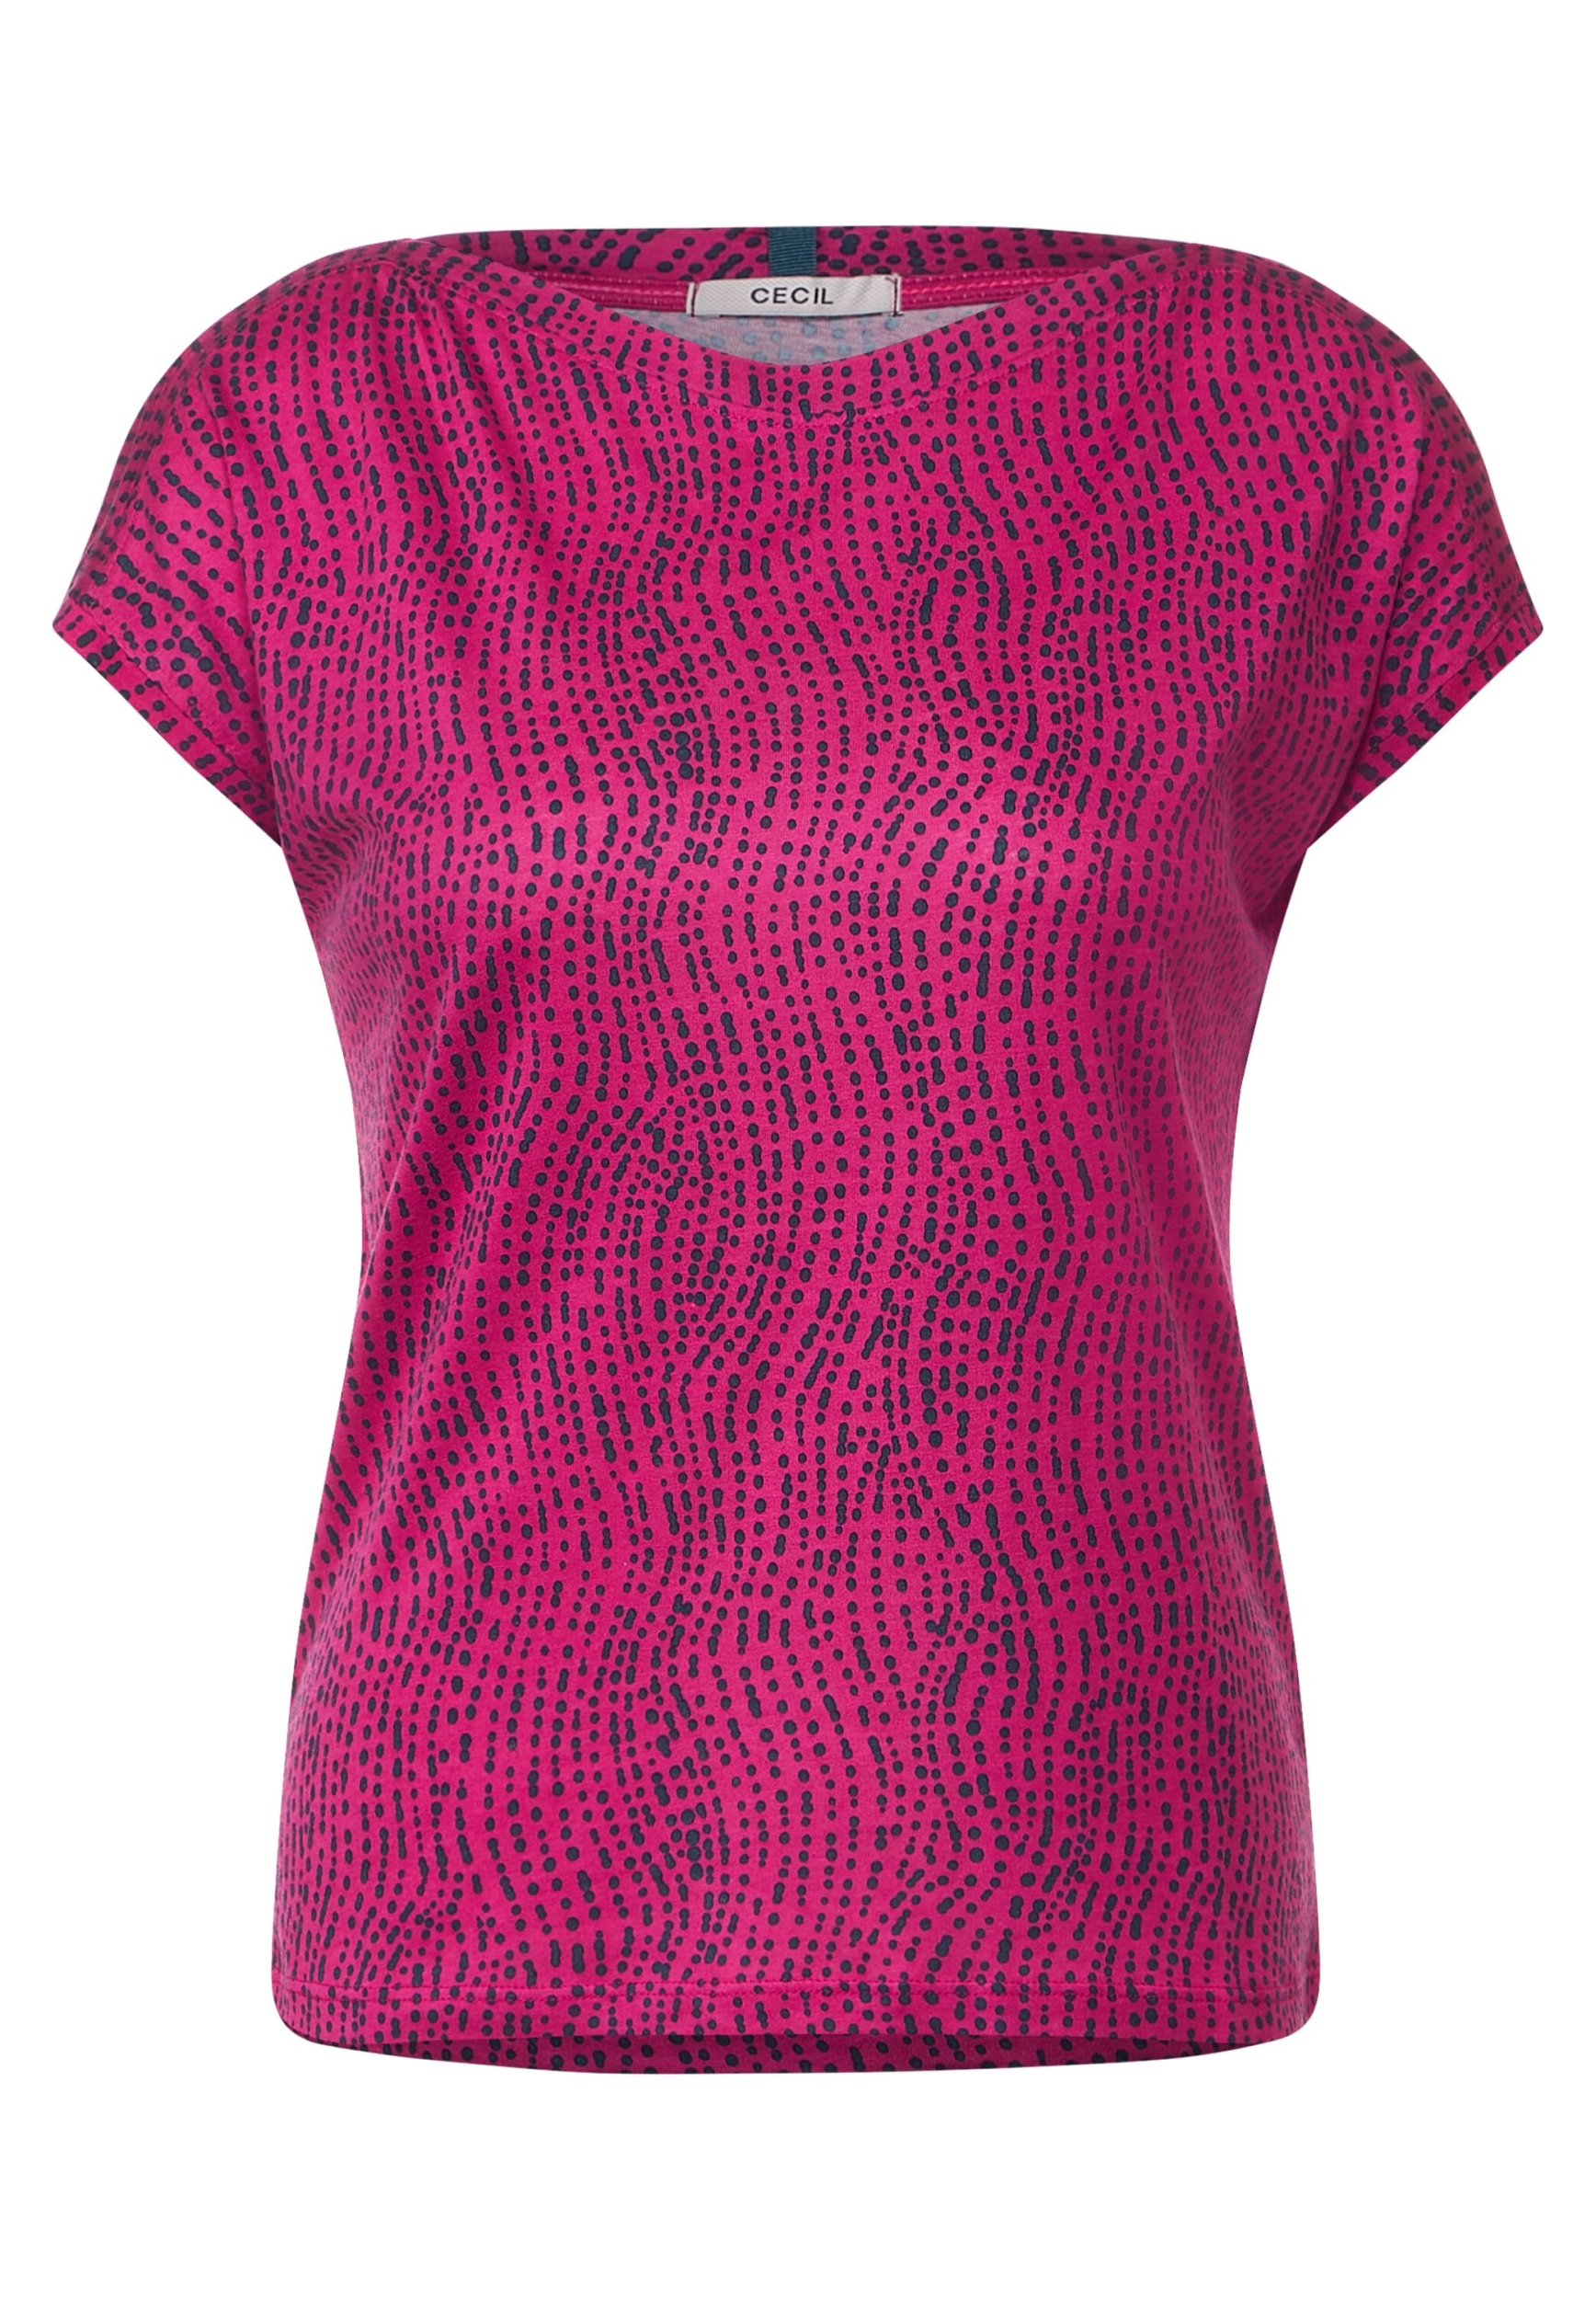 B320331-25095-S Dotted | | cool | Weave T-Shirt S AOP TOS pink